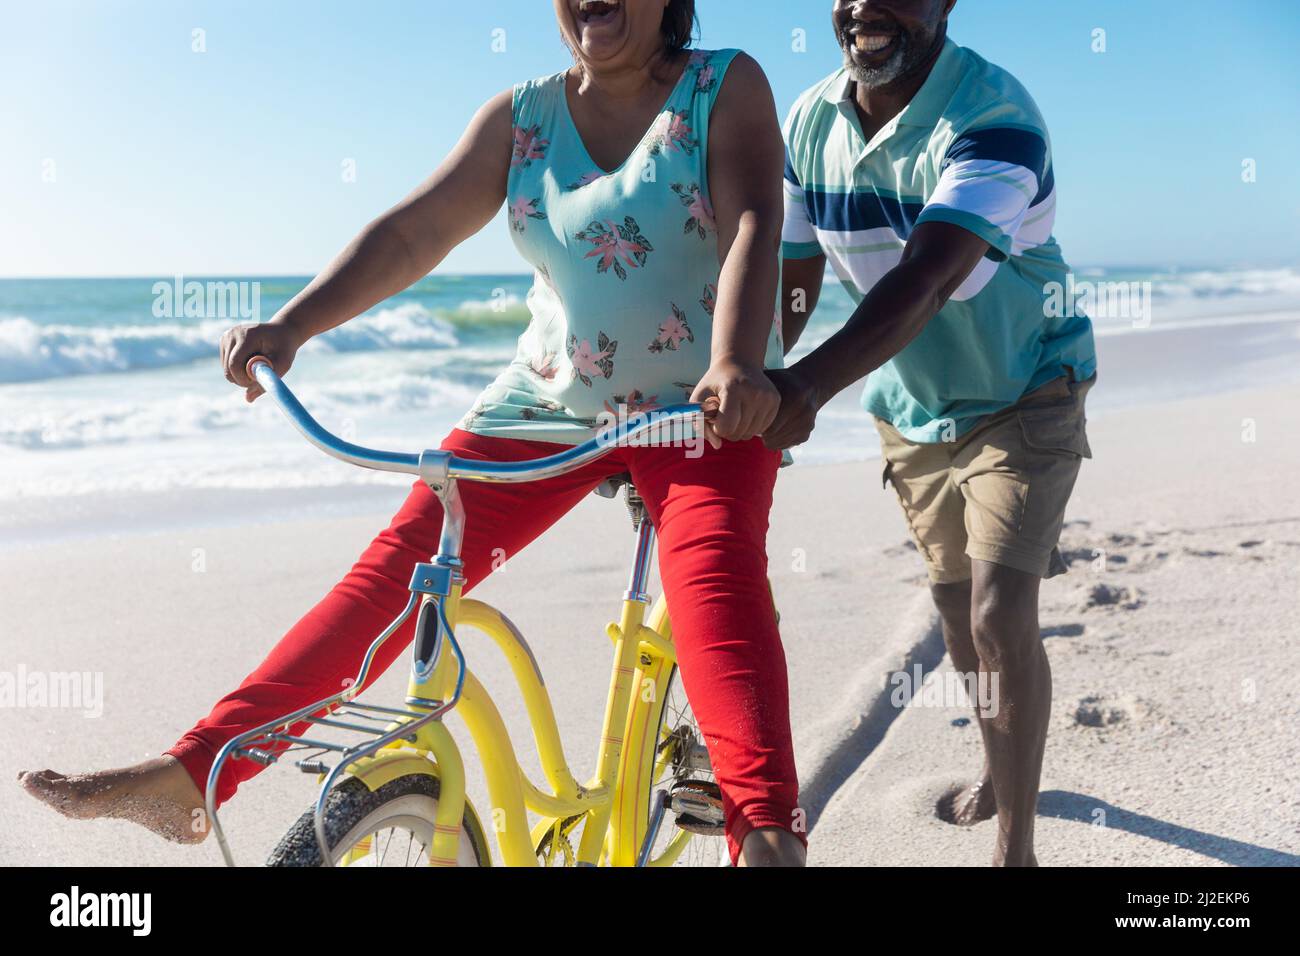 African american senior man assisting woman riding bicycle at beach on sunny day Stock Photo